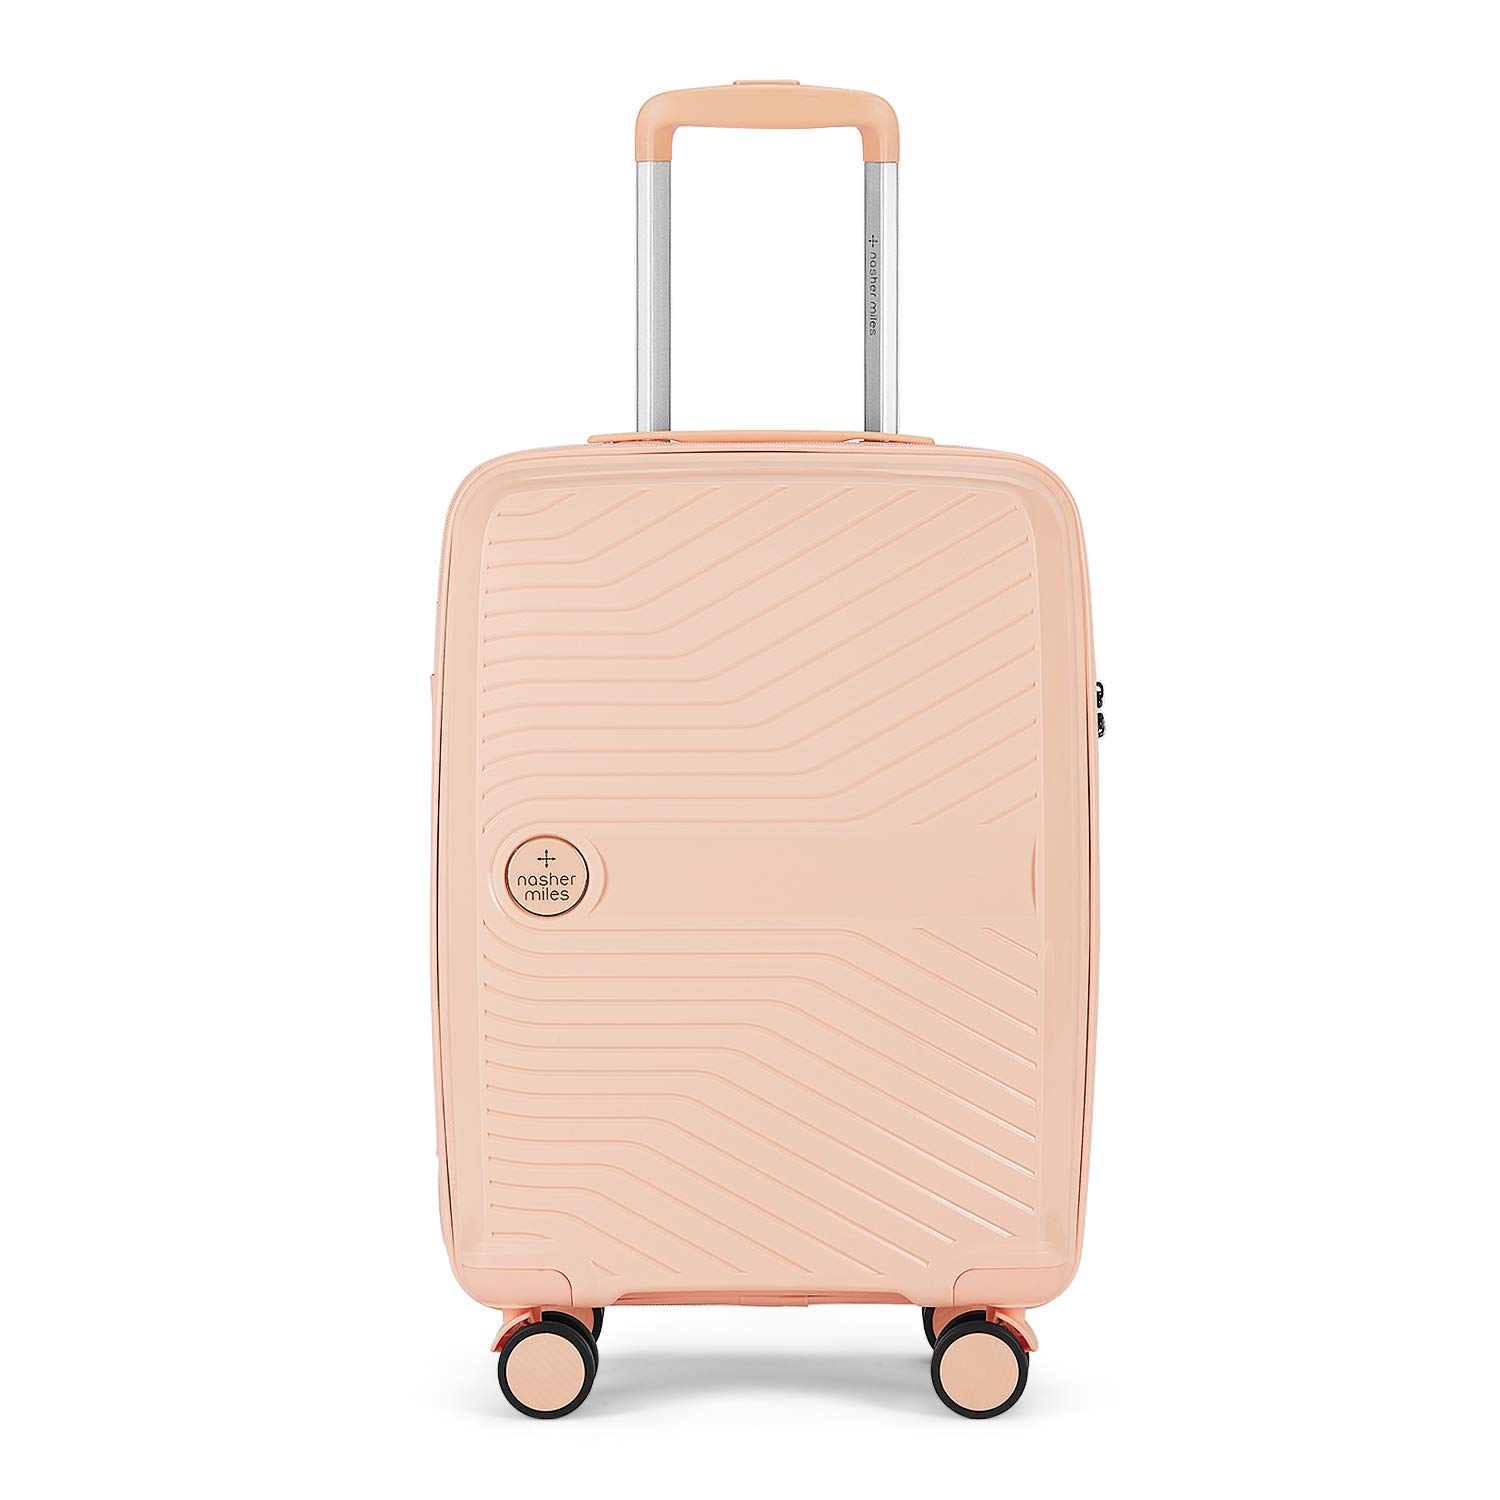 Buy Small Size Peach Cabin Luggage Bag I Nasher Miles